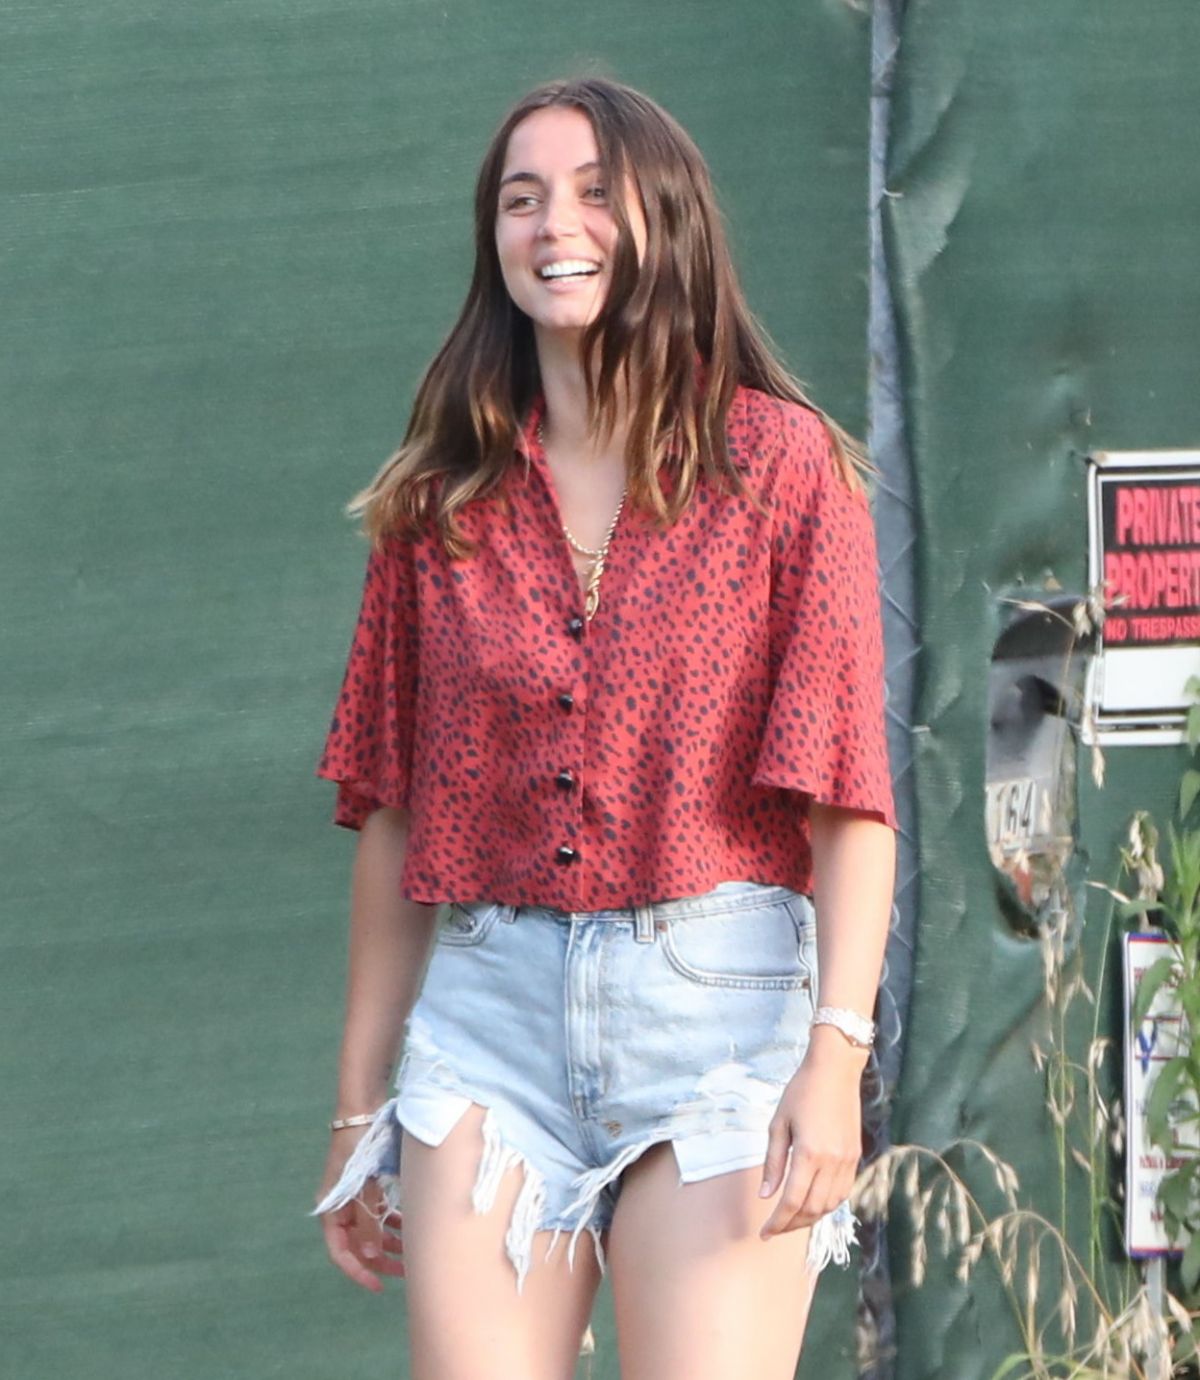 Ana De Armas seen in Beautiful Top and Denim Out in Brentwood 2020/06/04